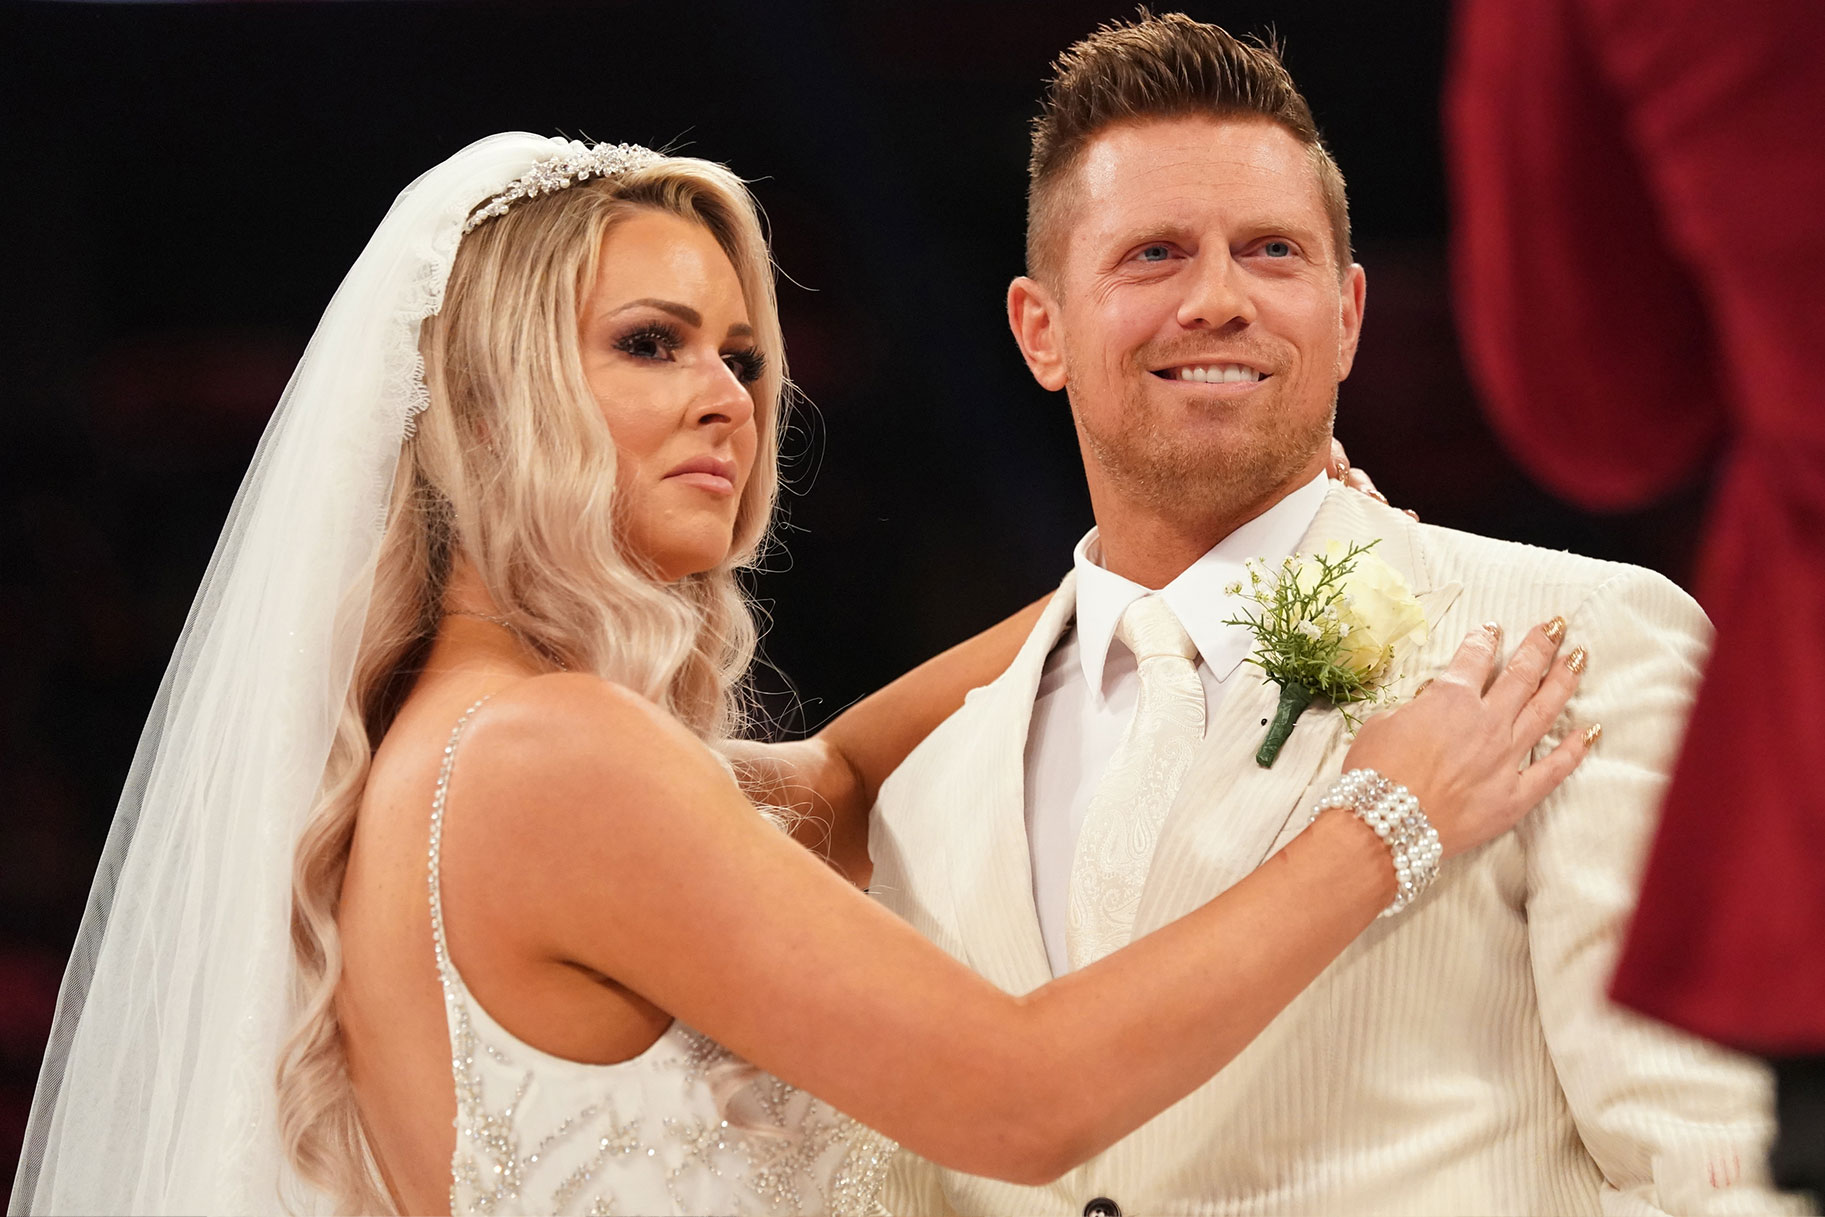 The Miz and Maryse dressed as a bride and groom